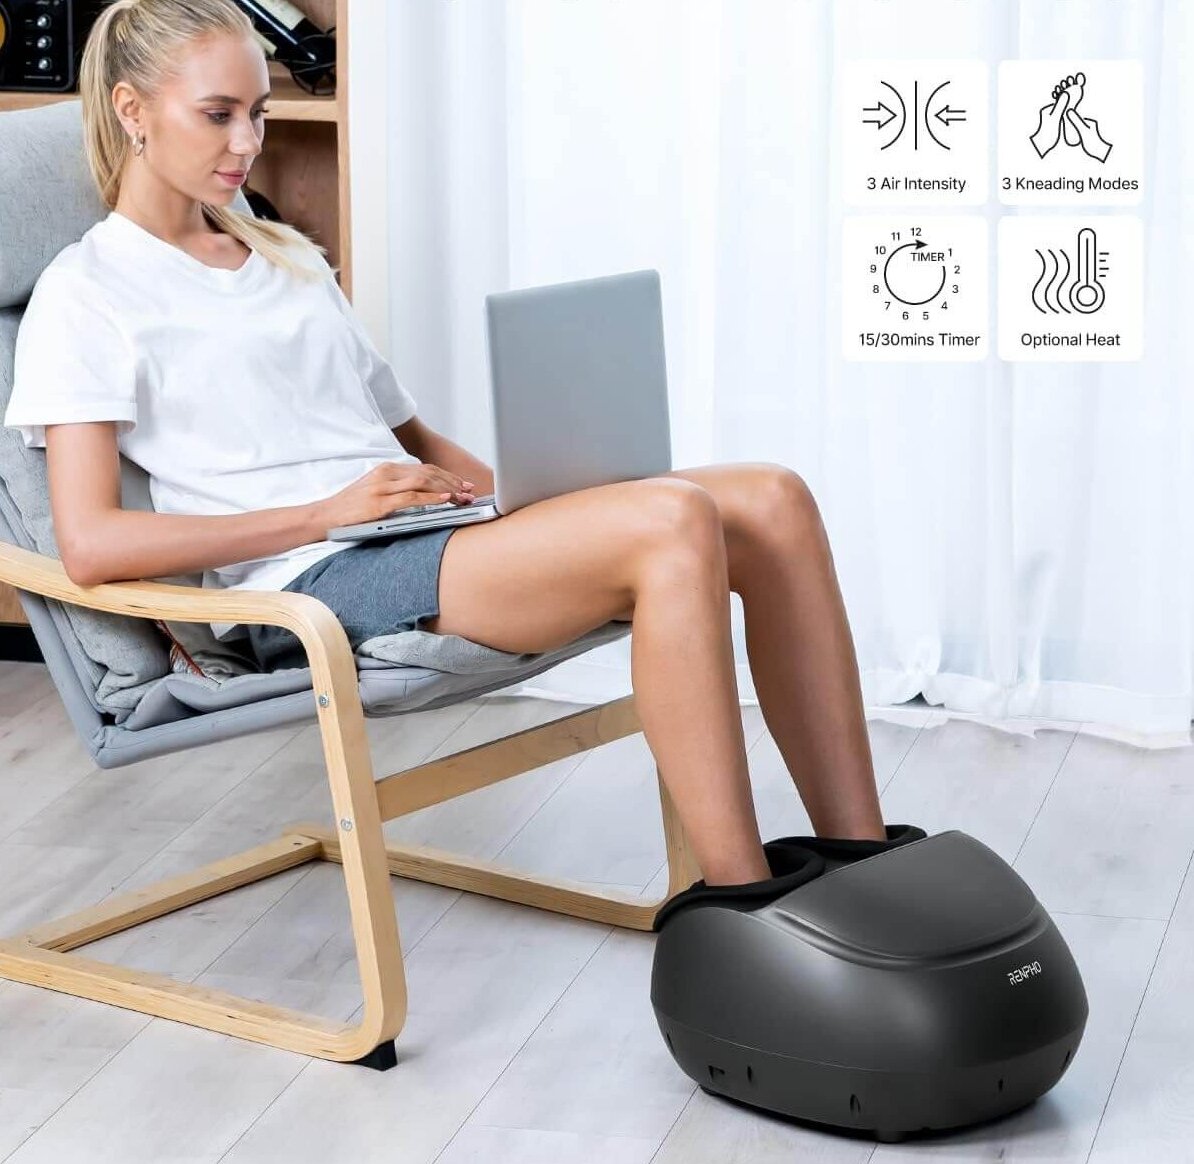 Woman using foot massager while sitting in a chair using her laptop